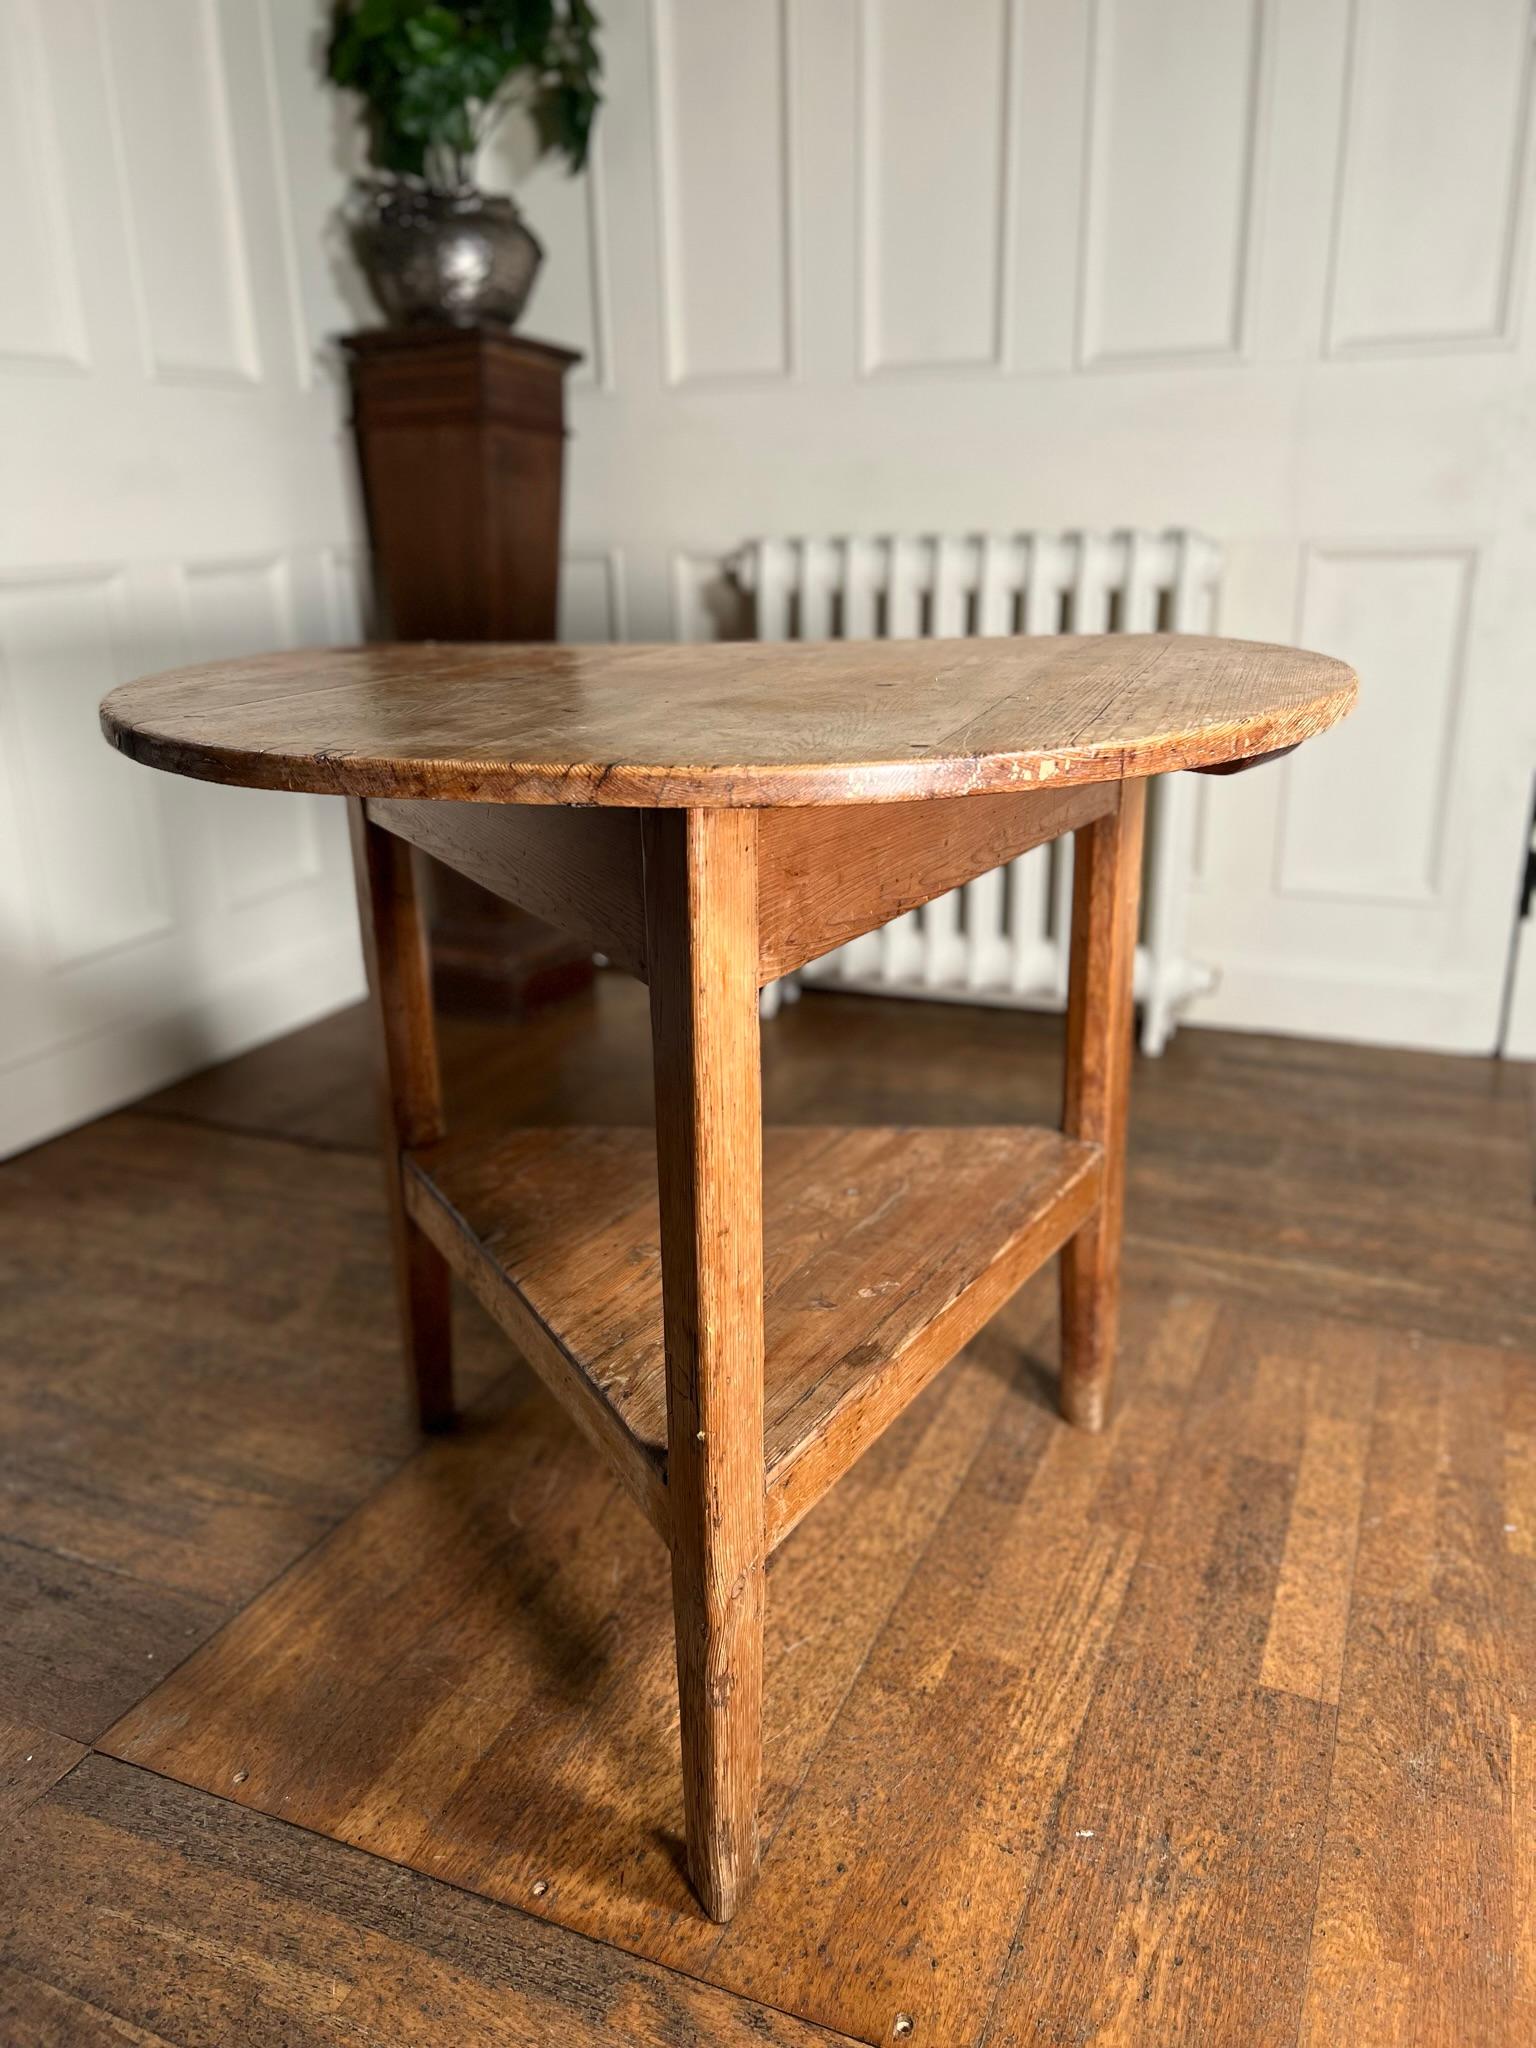 Early 19th century pine cricket table.

Historic ‘modification’ allows this to be used against a wall as a console table.

Washed out, waxed pine top with historic signs of worm, knocks and bumps.

Exactly how it should be.

English,